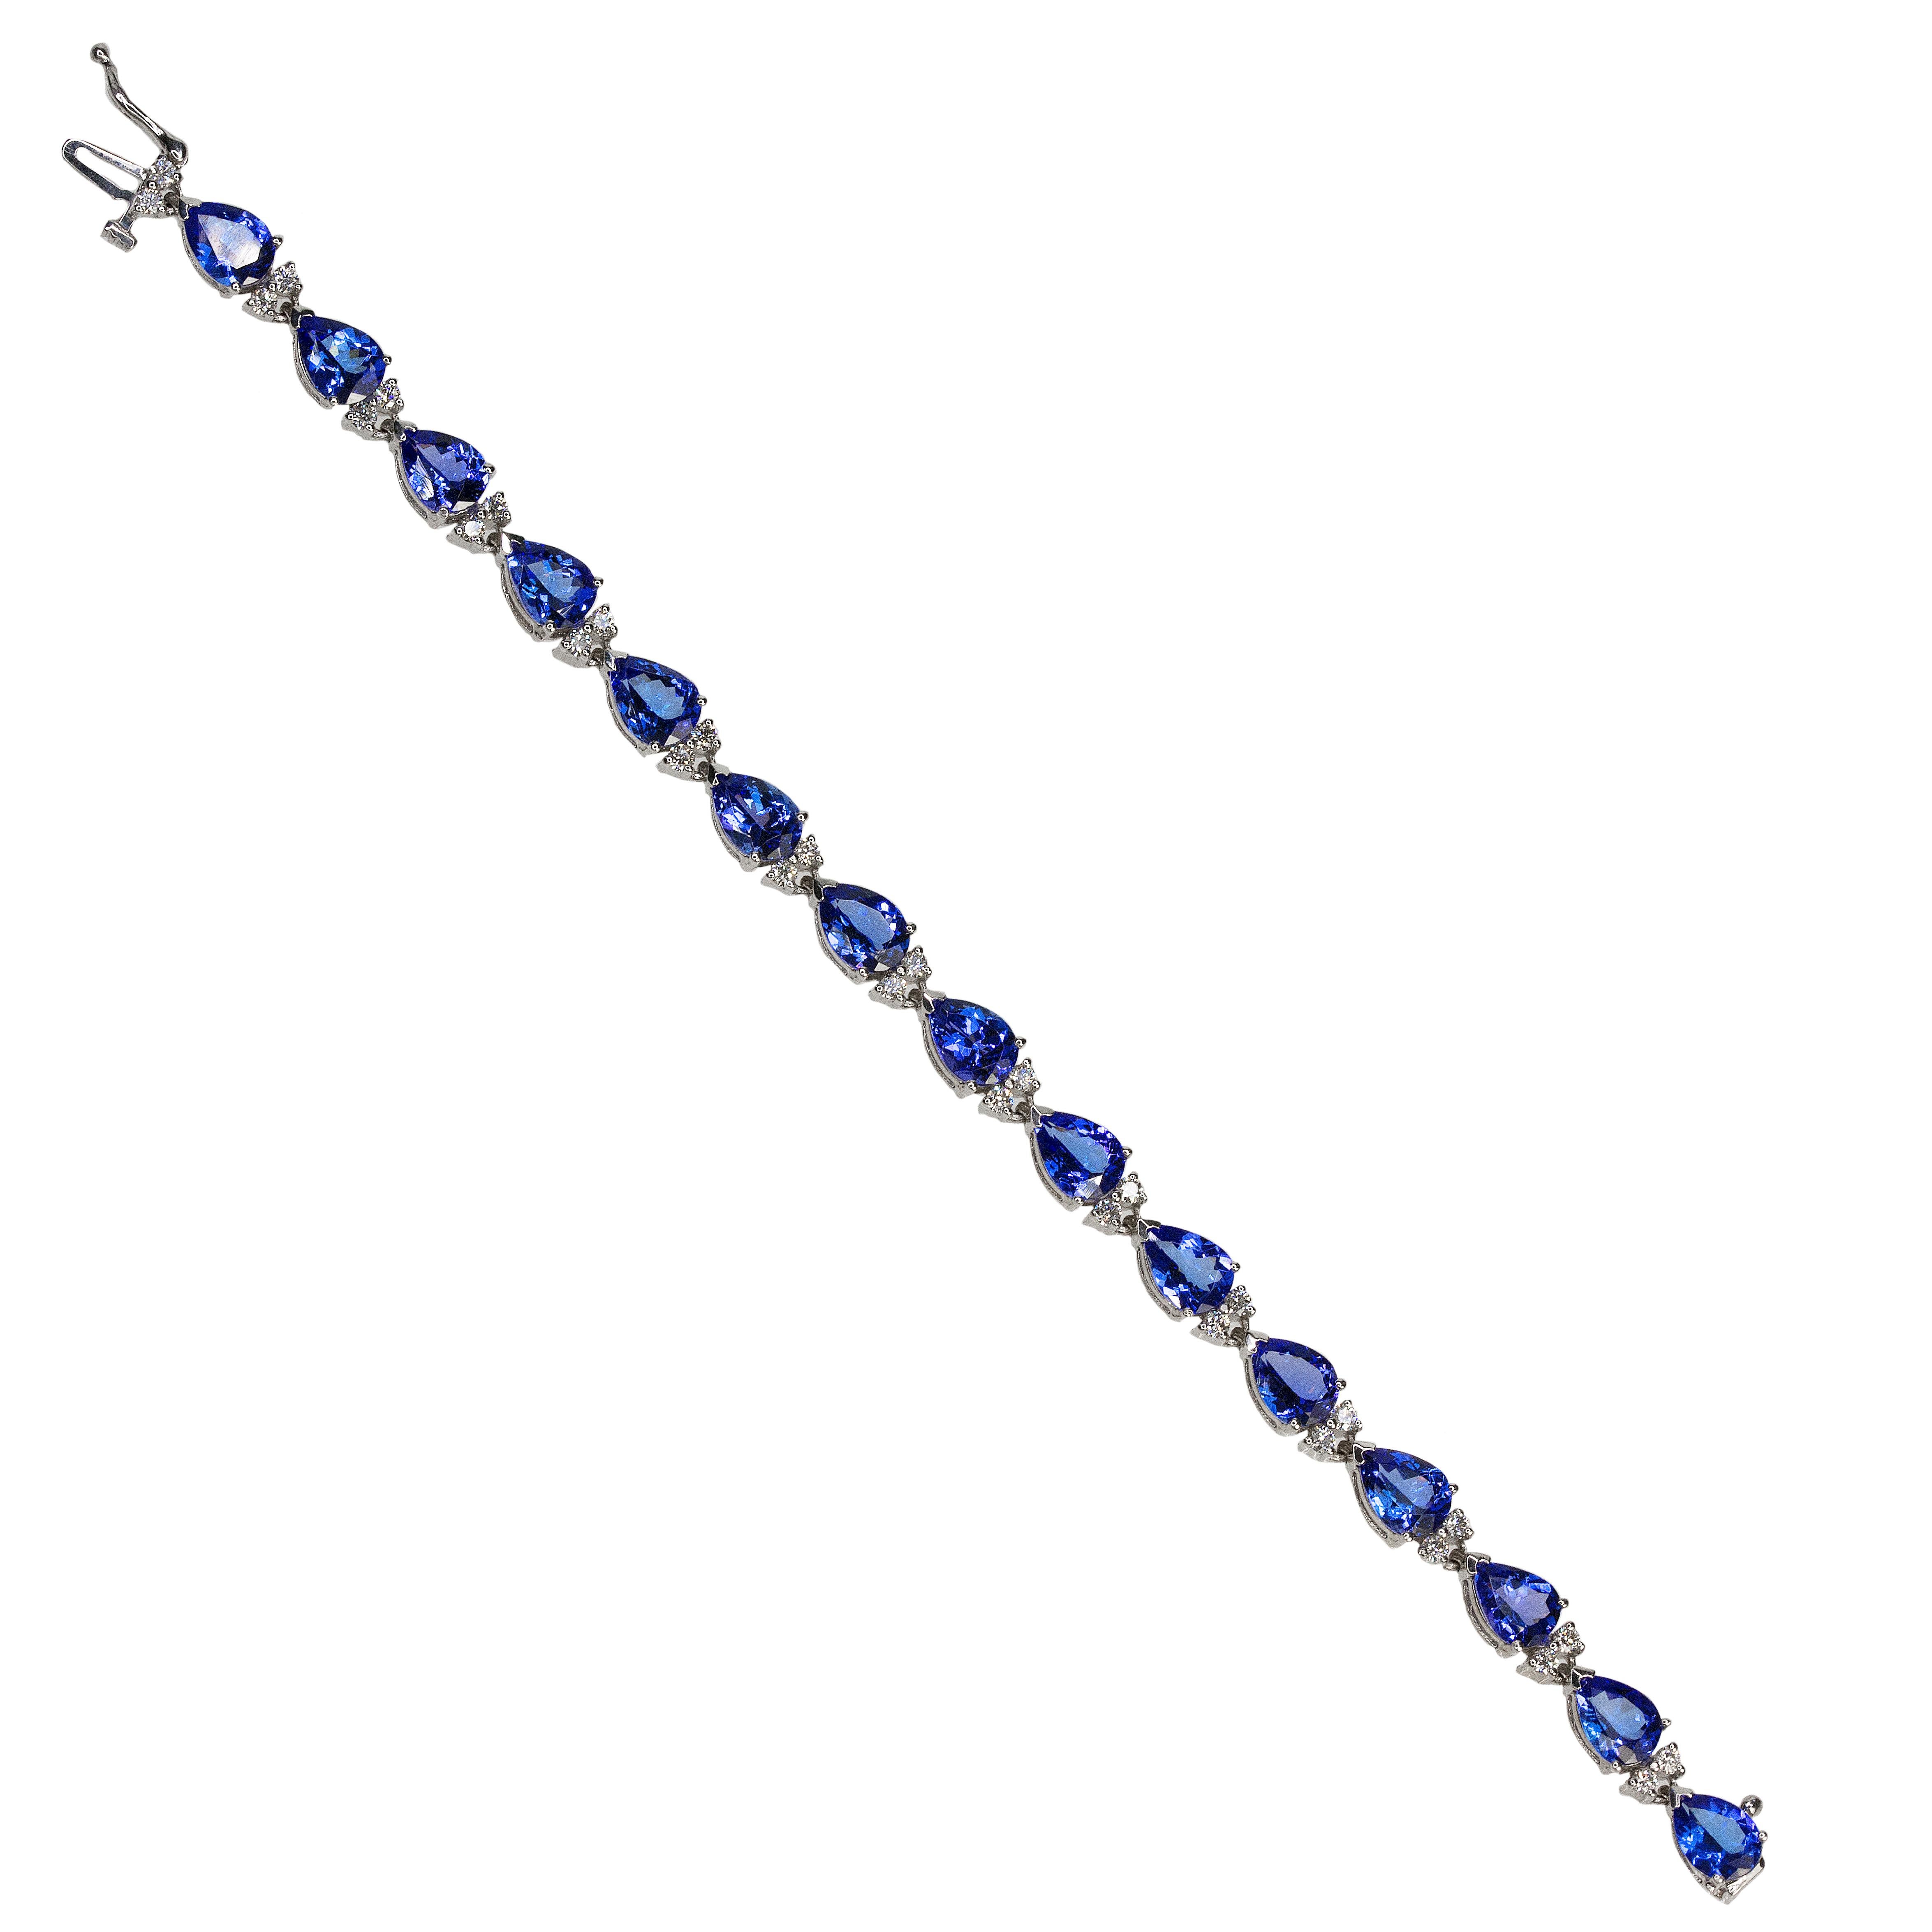 14kw Bracelet containing 15 pear shape Tanzanites weighing approximately 20.00 carats and 30 round brilliant diamonds weighing approximately 1.20 carats. 14.89g